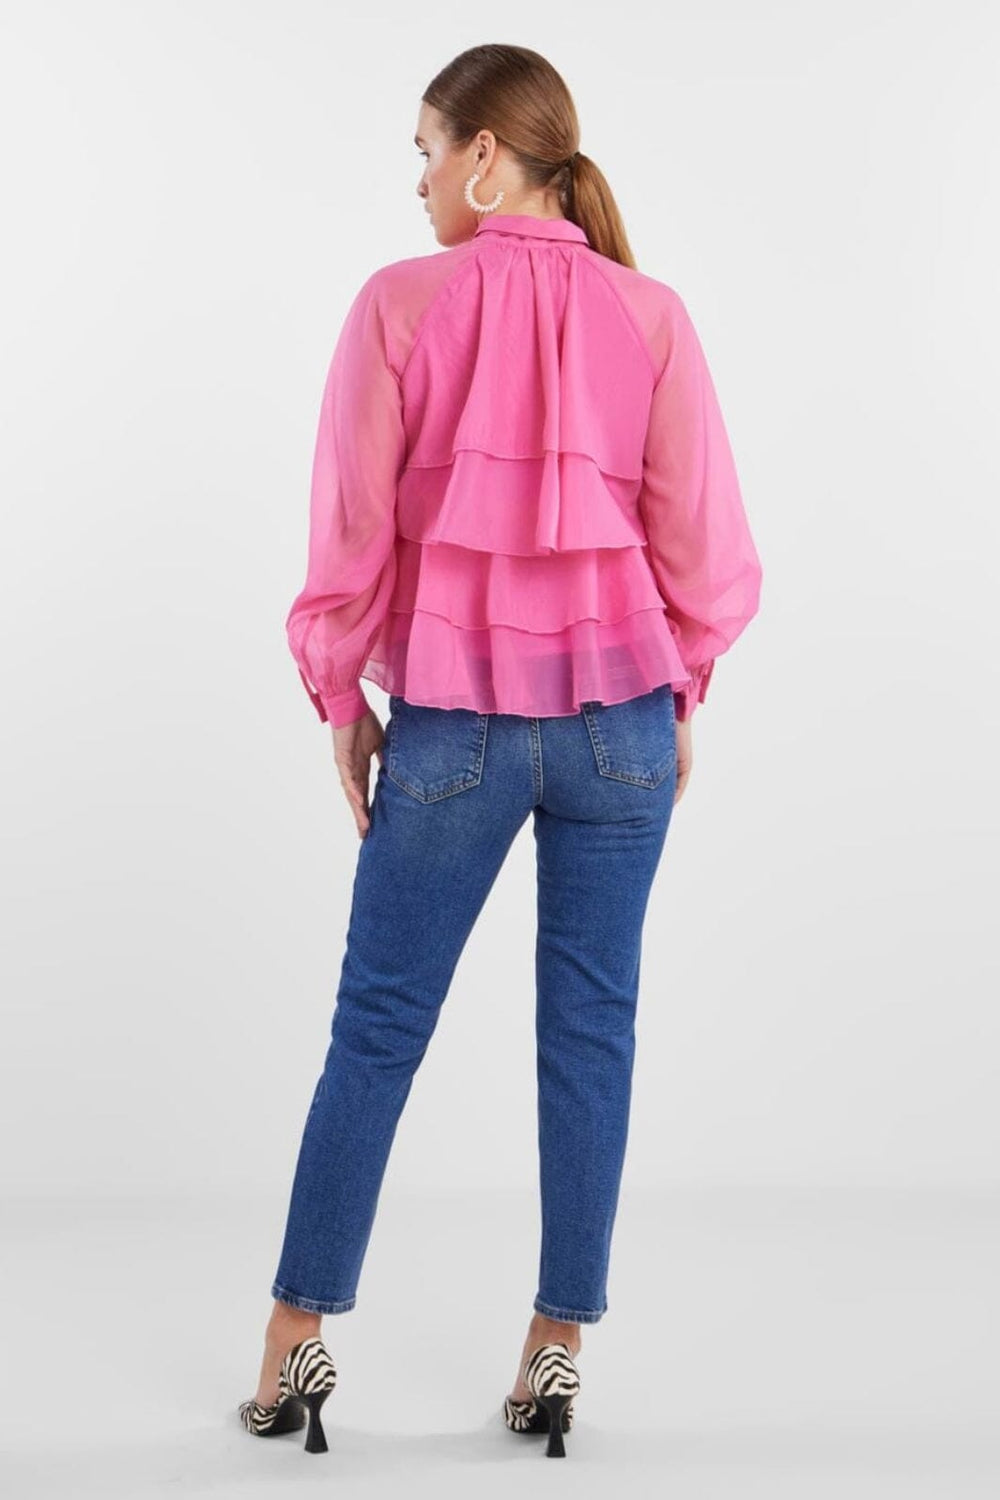 Y.A.S - Yaseloise Ls Top Show - 4260515 Fuchsia Pink Bluser 